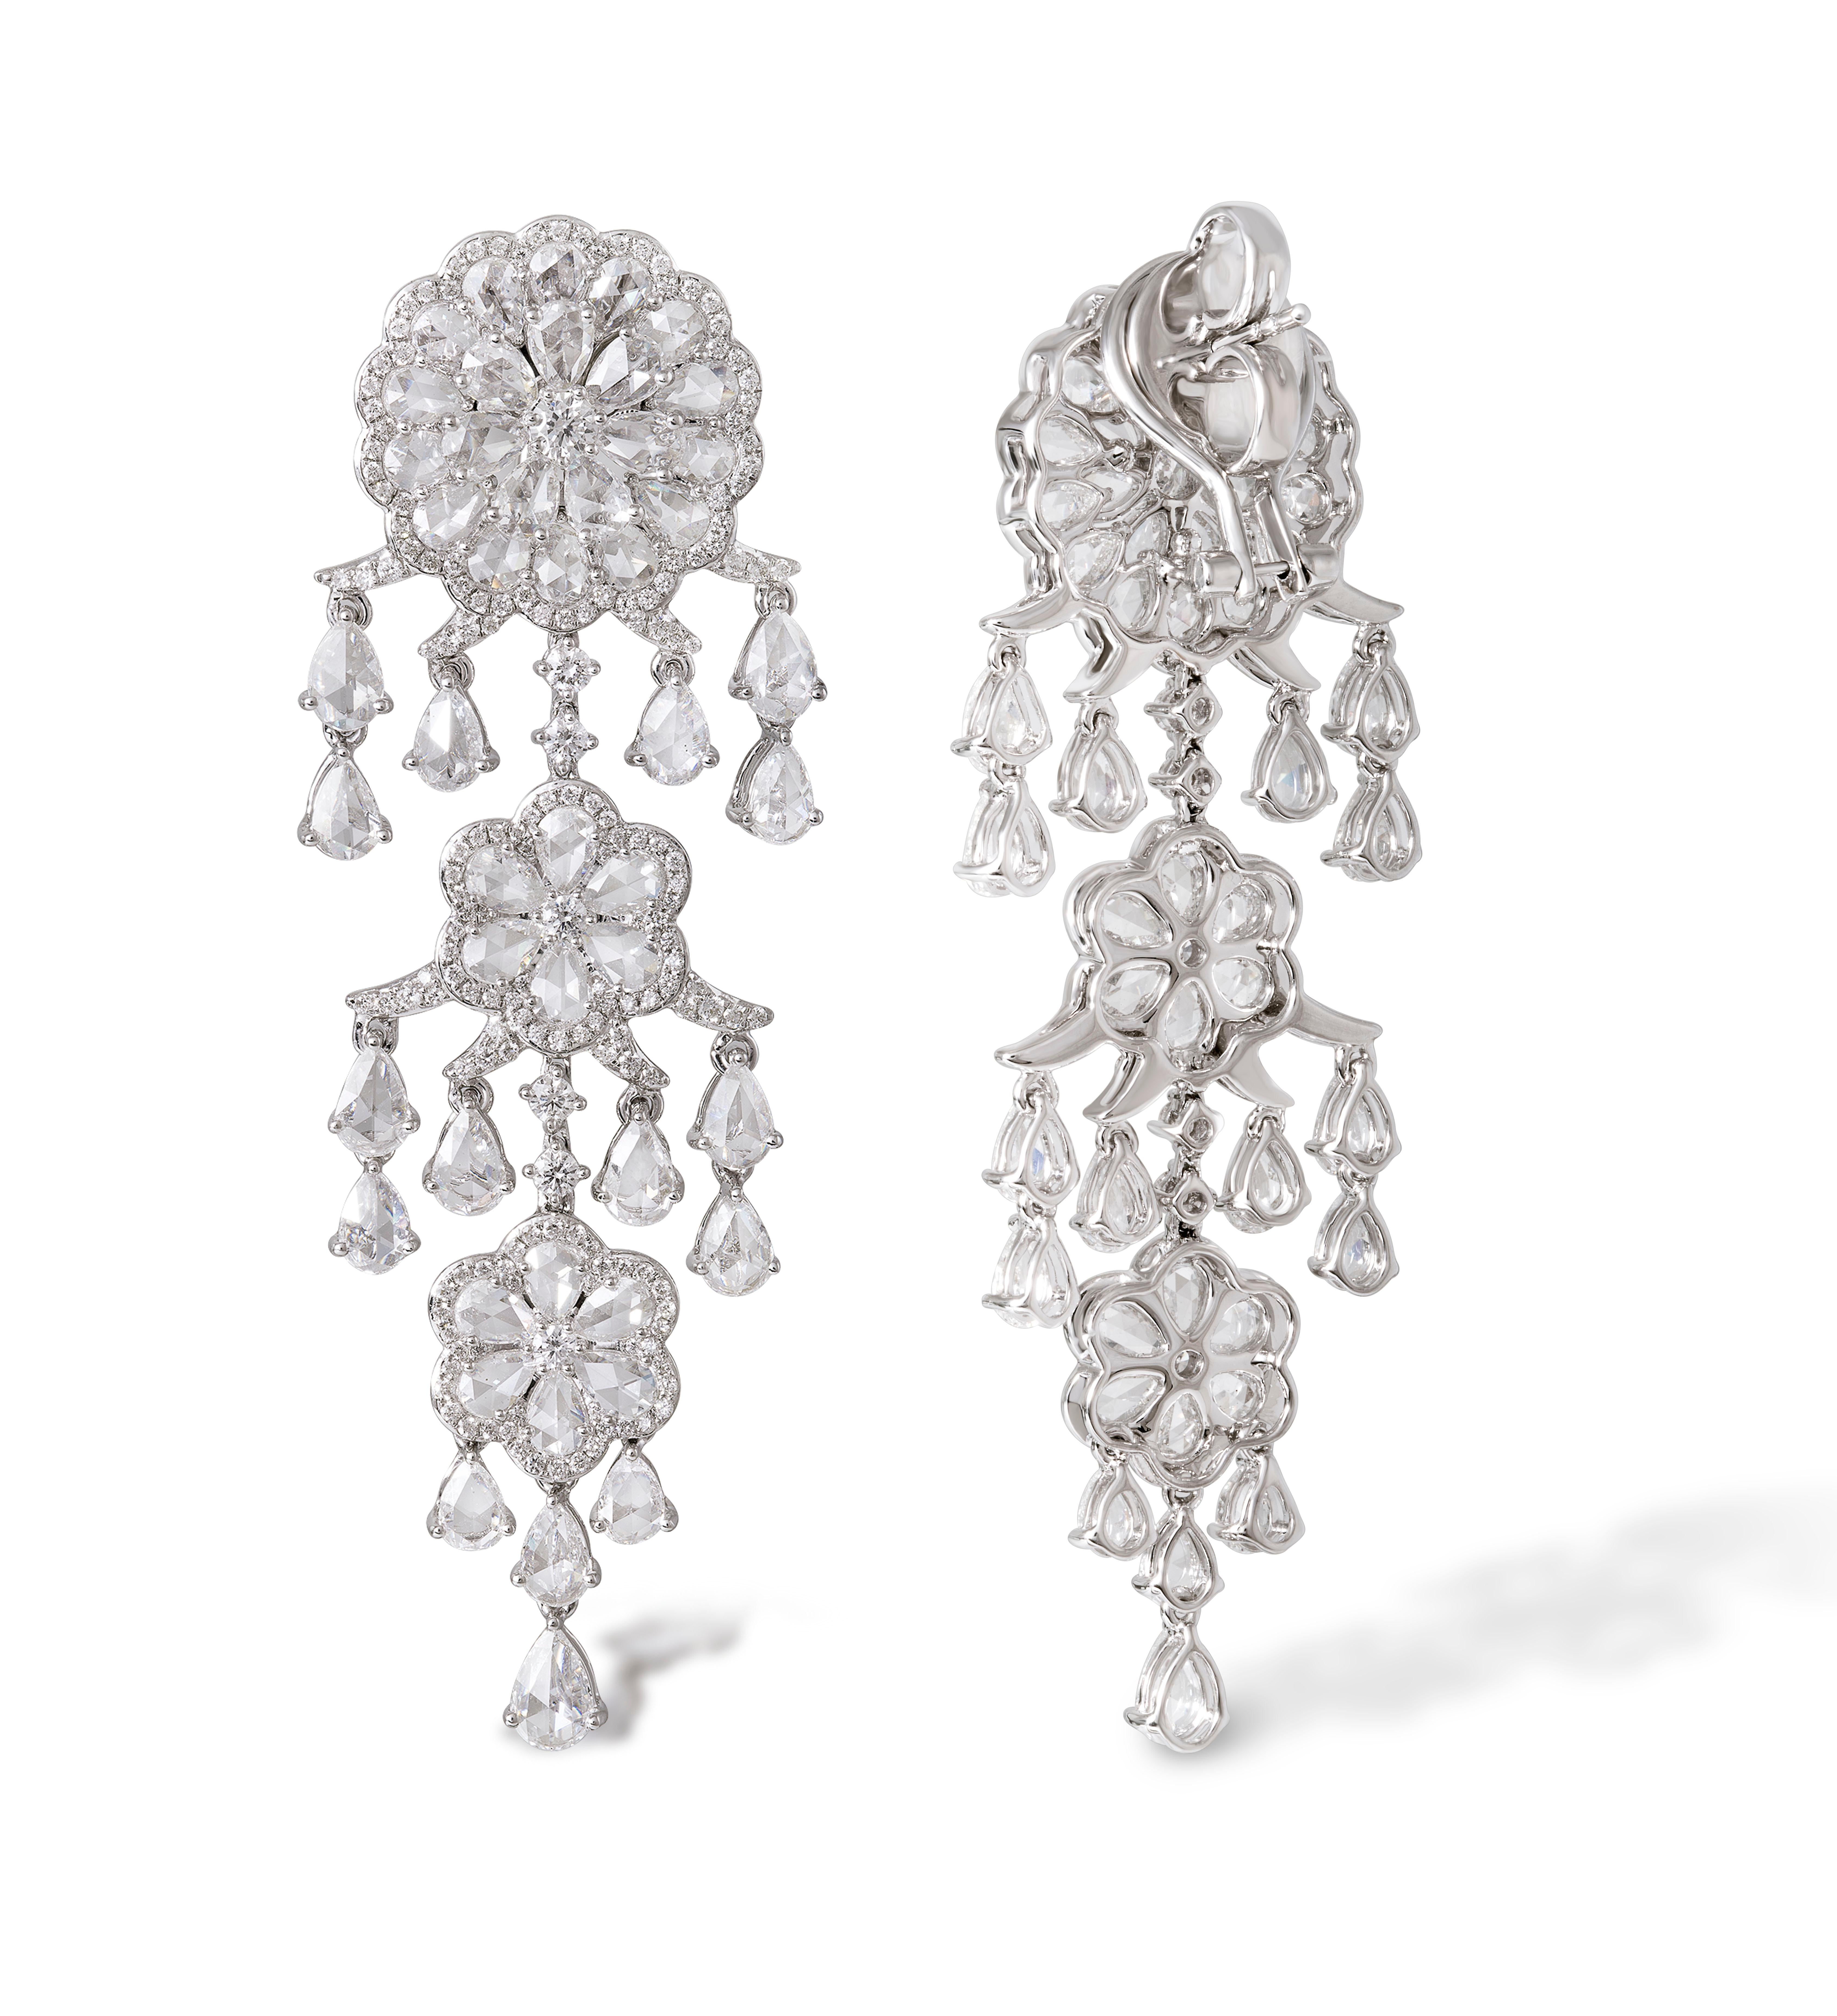 Taking inspiration from the unmistakable beauty of the flower, these earrings are crafted with 68 pear shape,  rose-cut diamonds surrounding a round brilliant cut diamond to form the floral motif. 
Handcrafted from lightly hammered 18-karat gold and